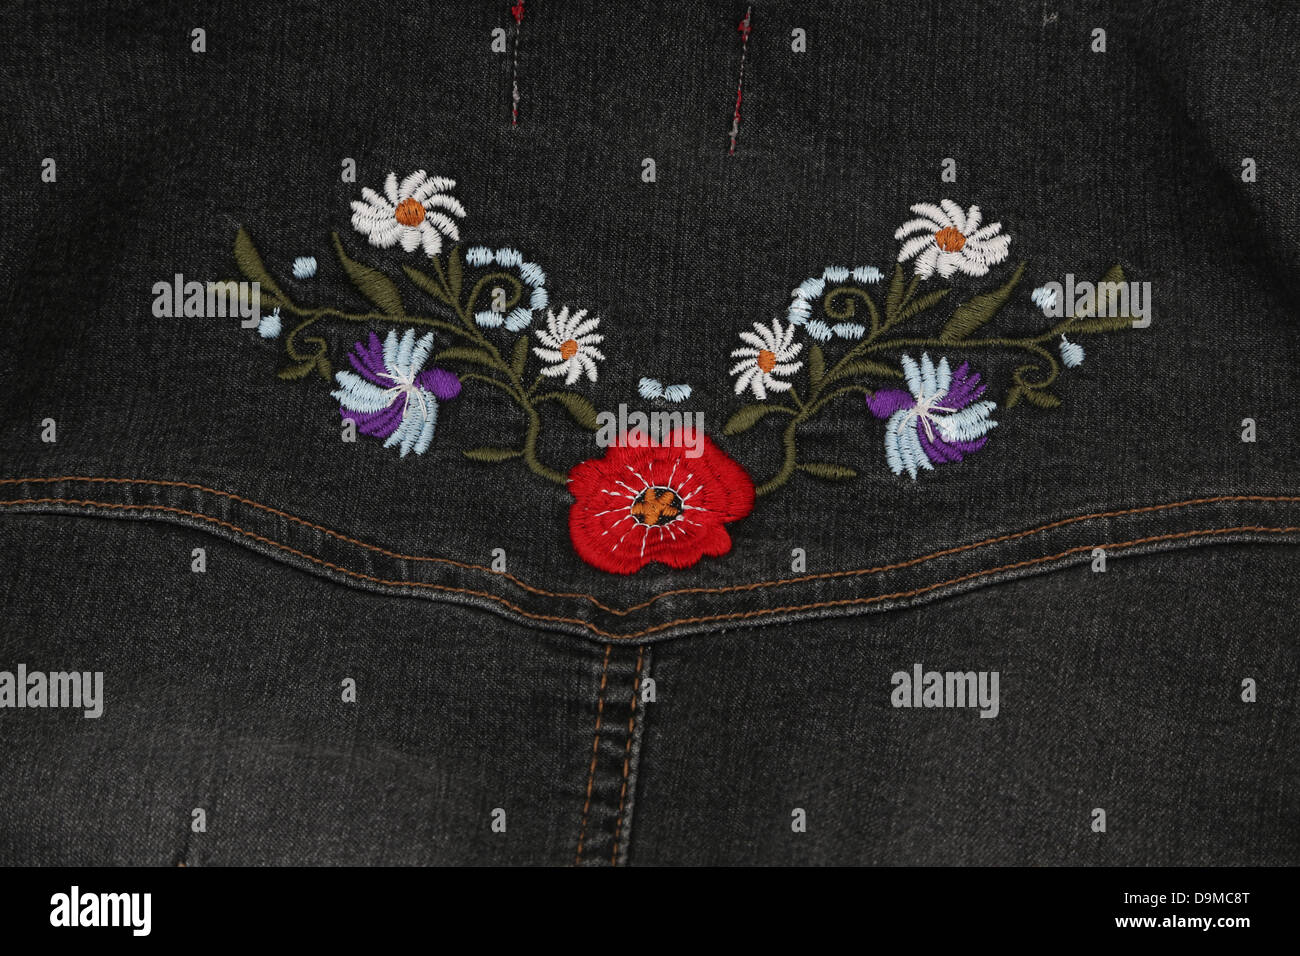 CARS Jeans Denim Jacket With Floral Pattern Embroidery On the Back Stock Photo